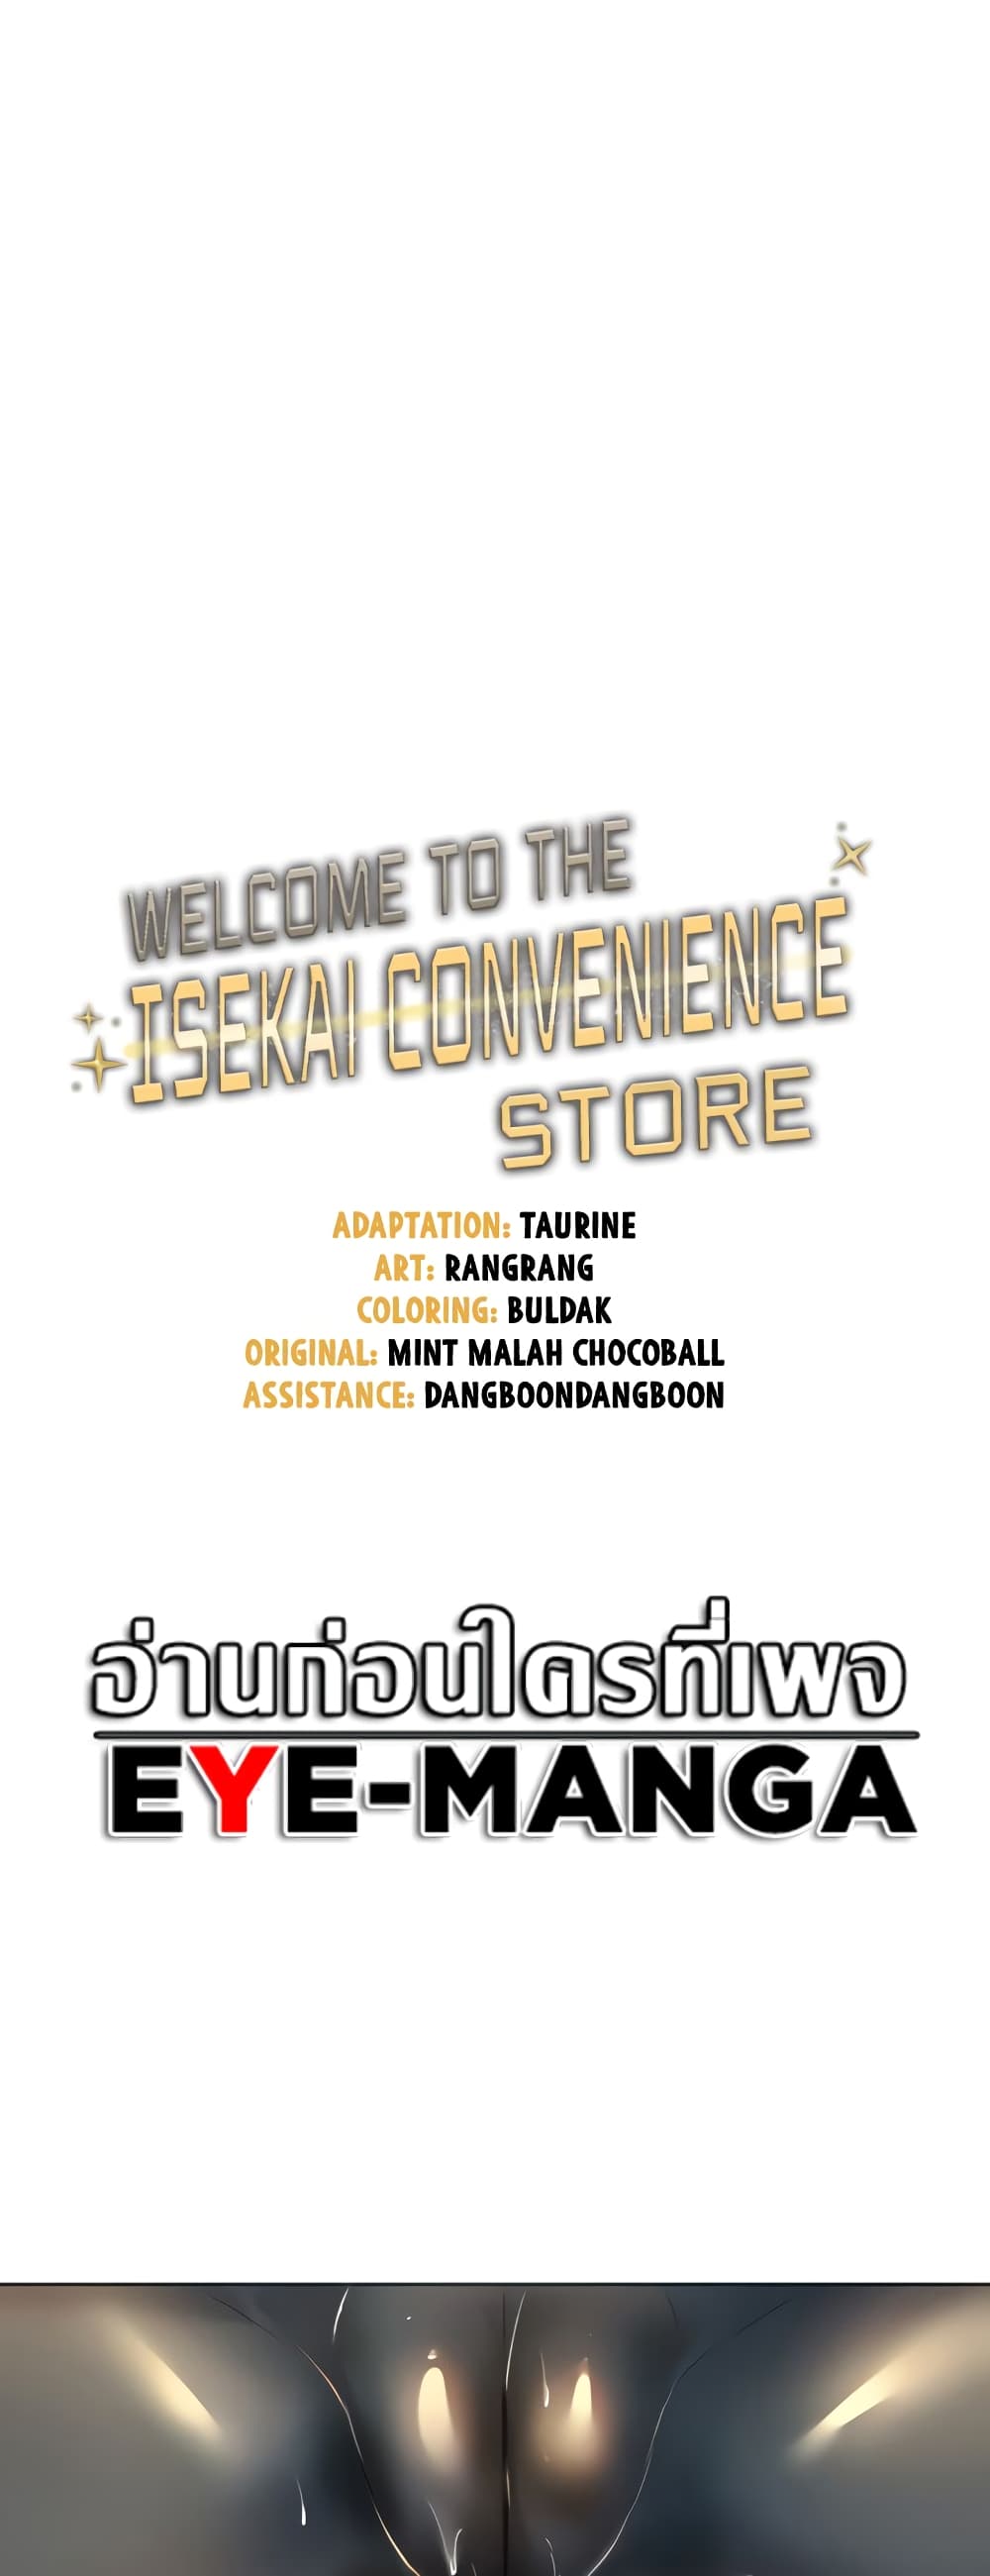 Welcome to the Isekai Convenience Store 6-6